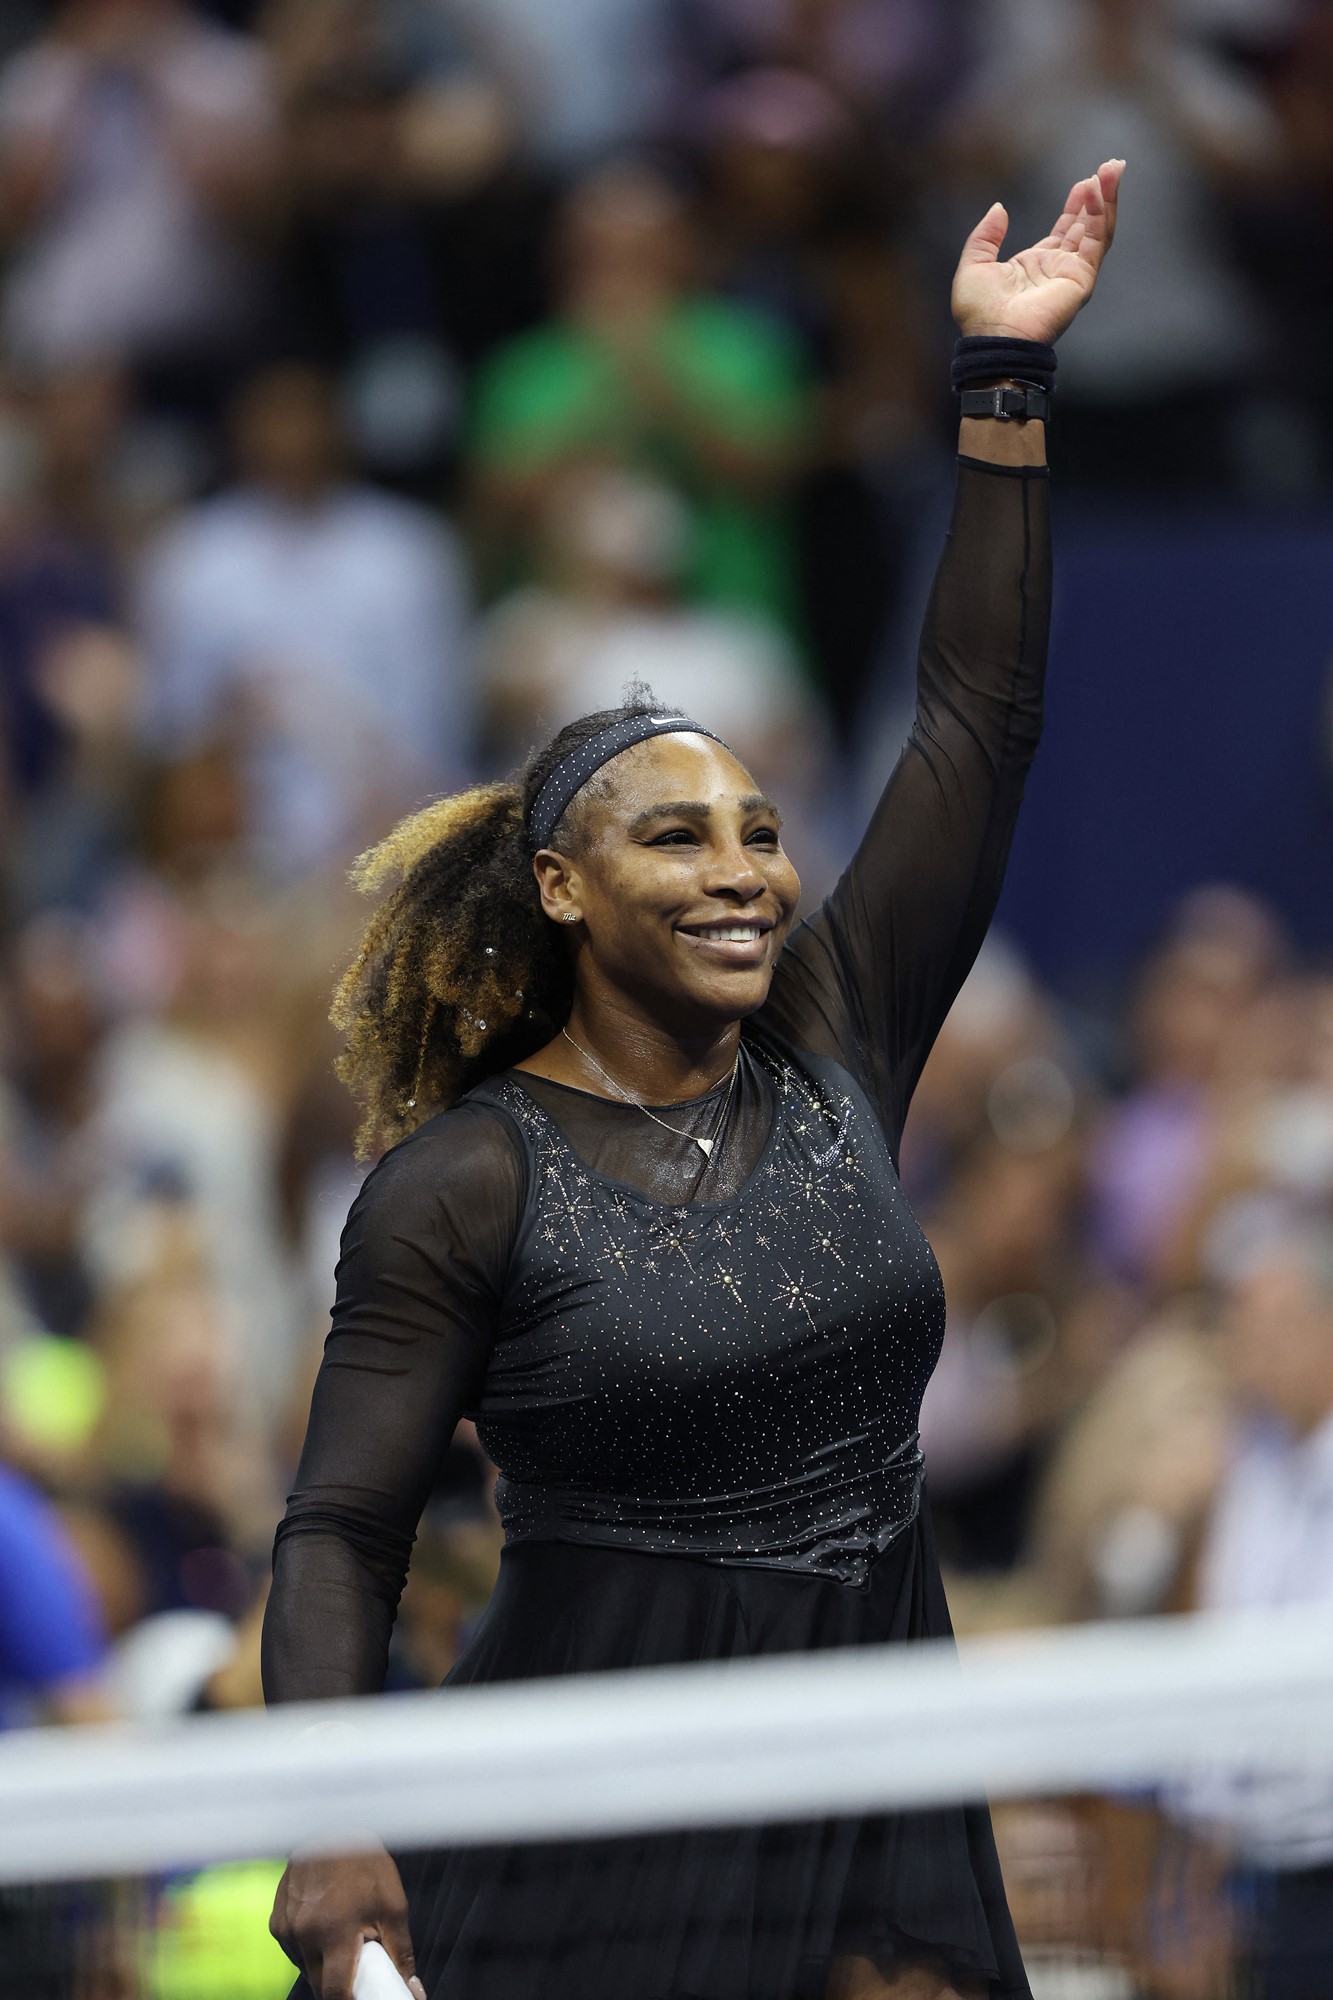 A woman in a black outfit celebrates after winning tennis.